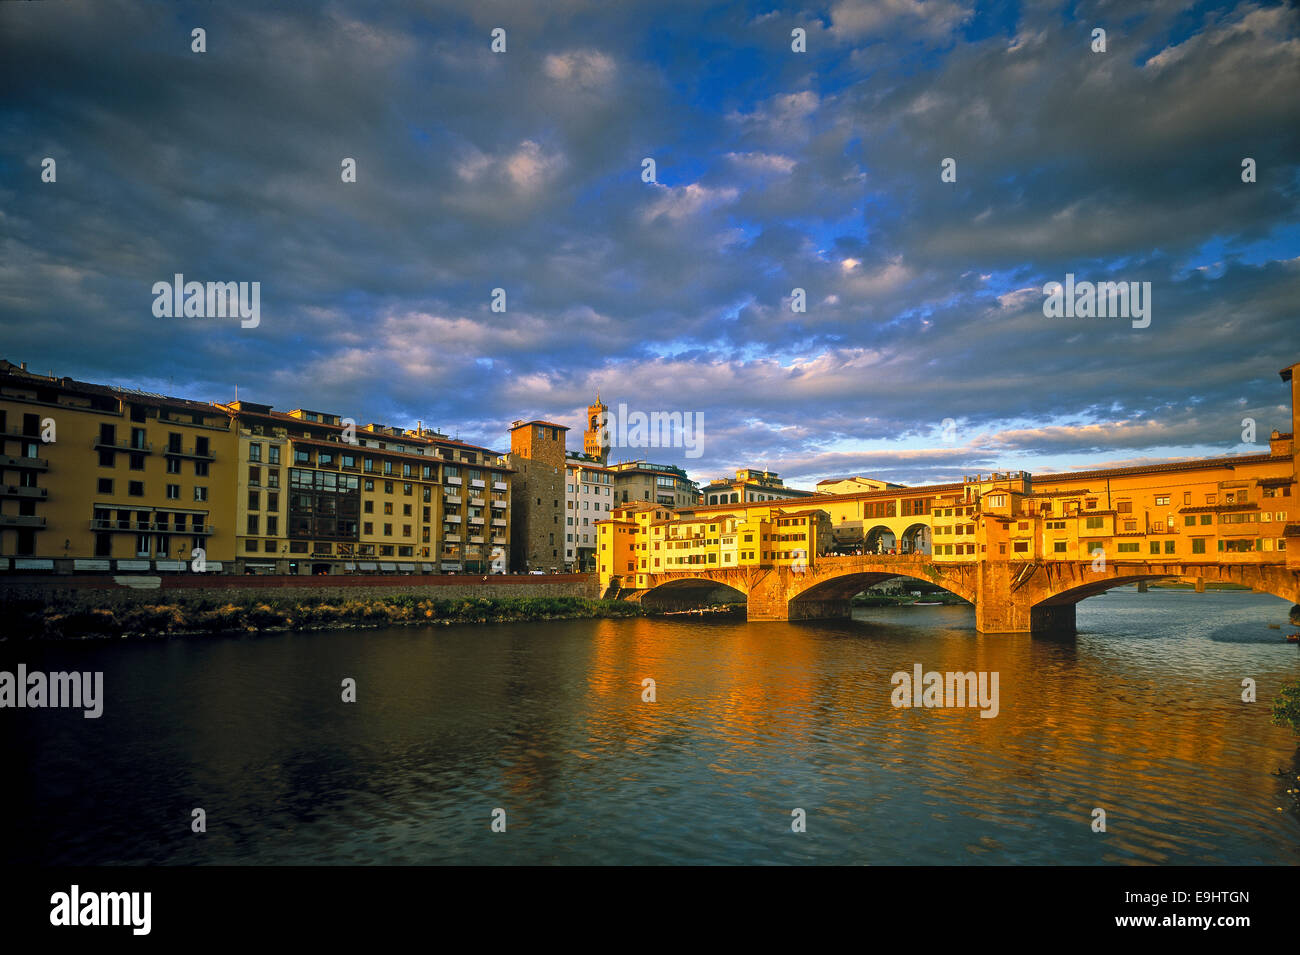 Florence or Firenze (also once called Fiorenza or Florentia) is the capital city of the Italian region of Tuscany. Stock Photo